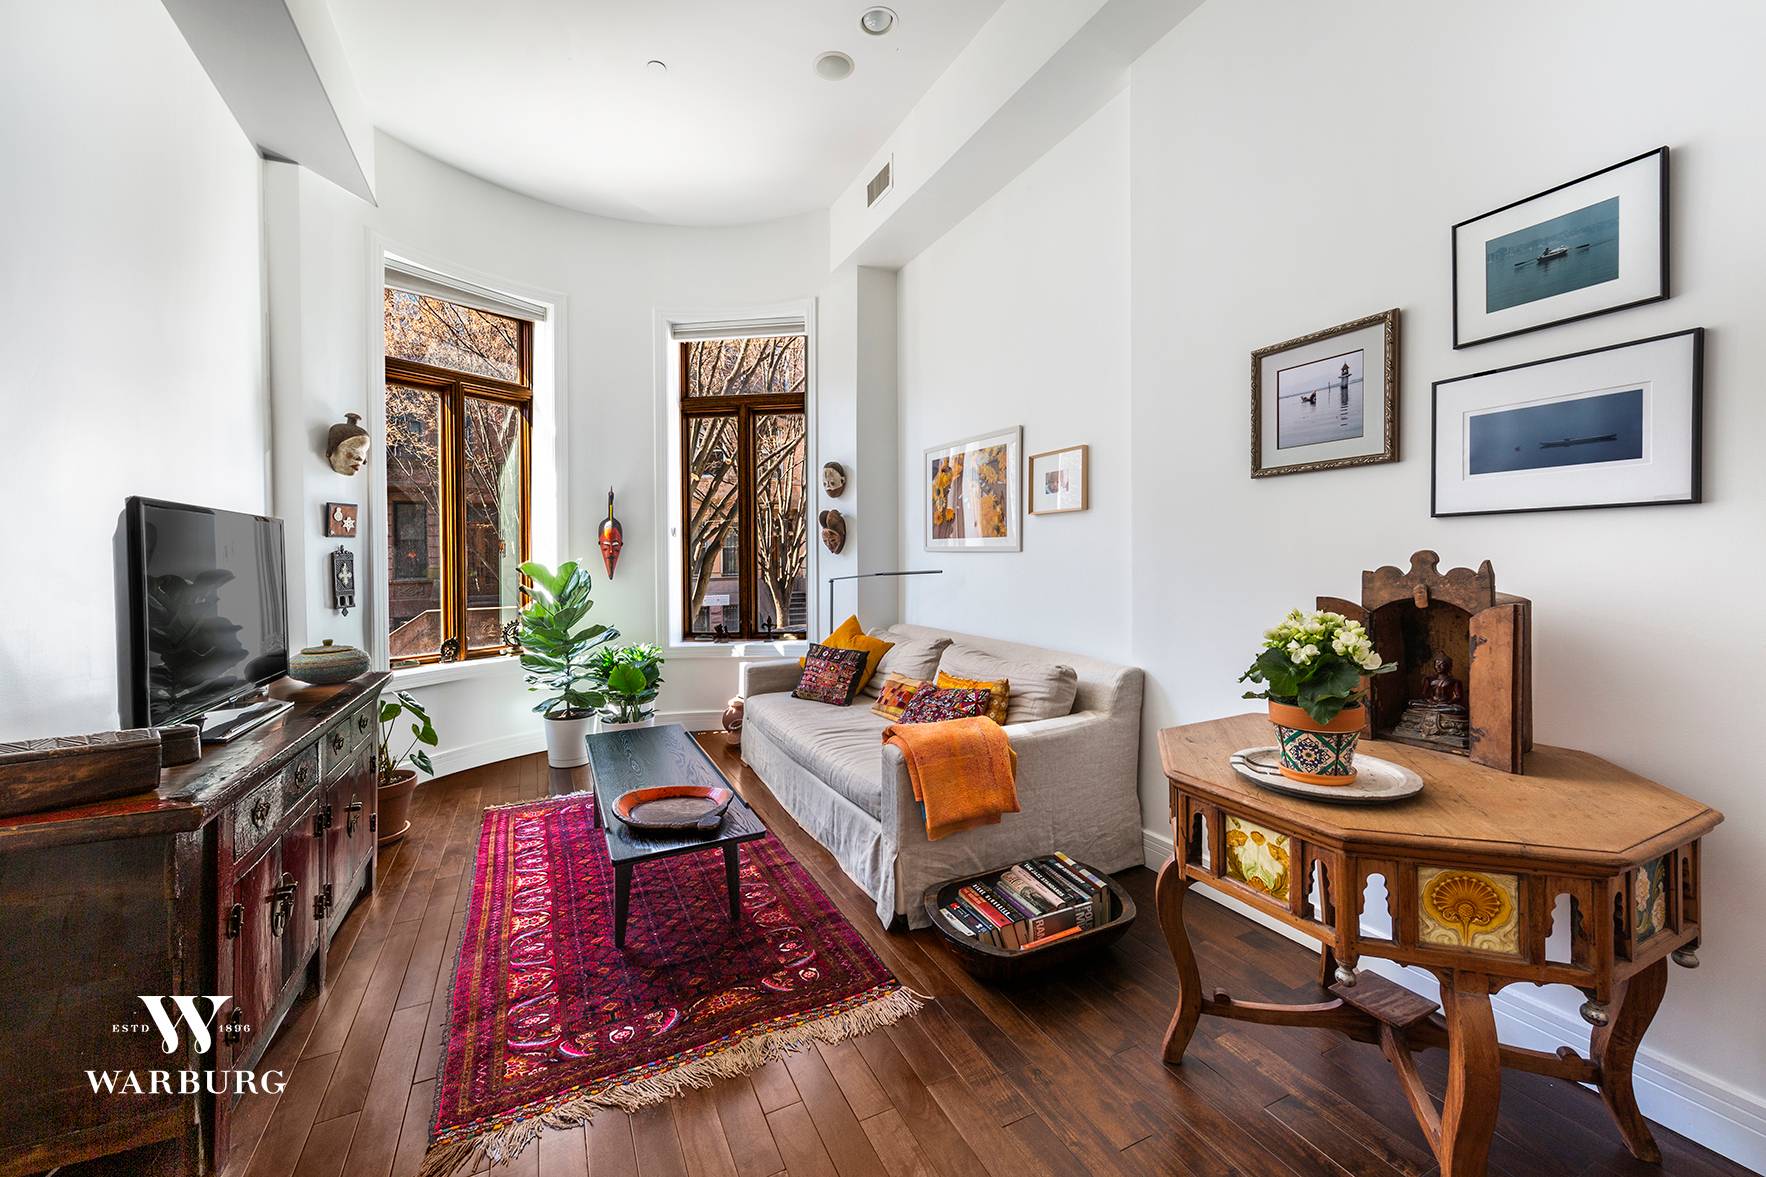 Welcome to Apartment 2 at 129 W 118th street, a stunning, parlor floor home in a historic, Harlem brownstone condominium.